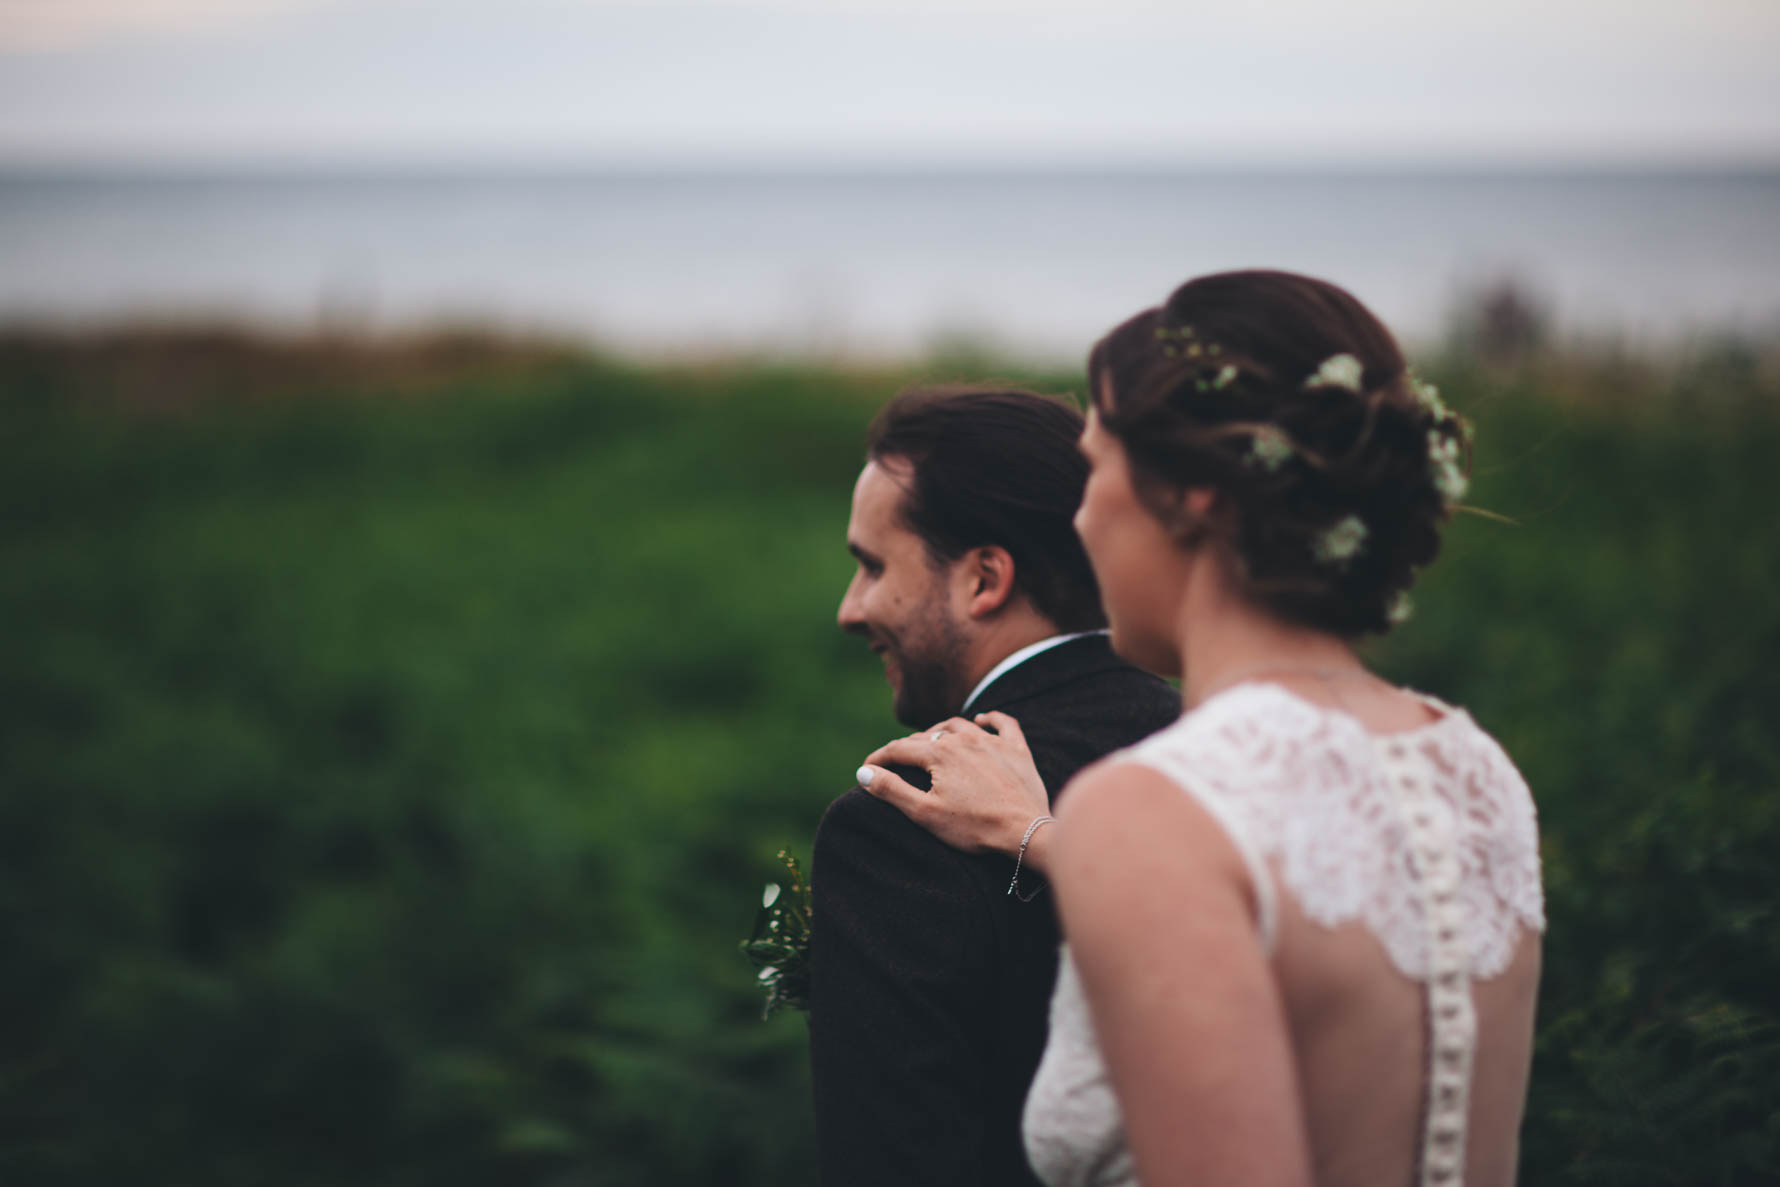 Bride walking with her hand on the groom's shoulder as they walk through a filed which is out of focus. You can see the sea in the distance